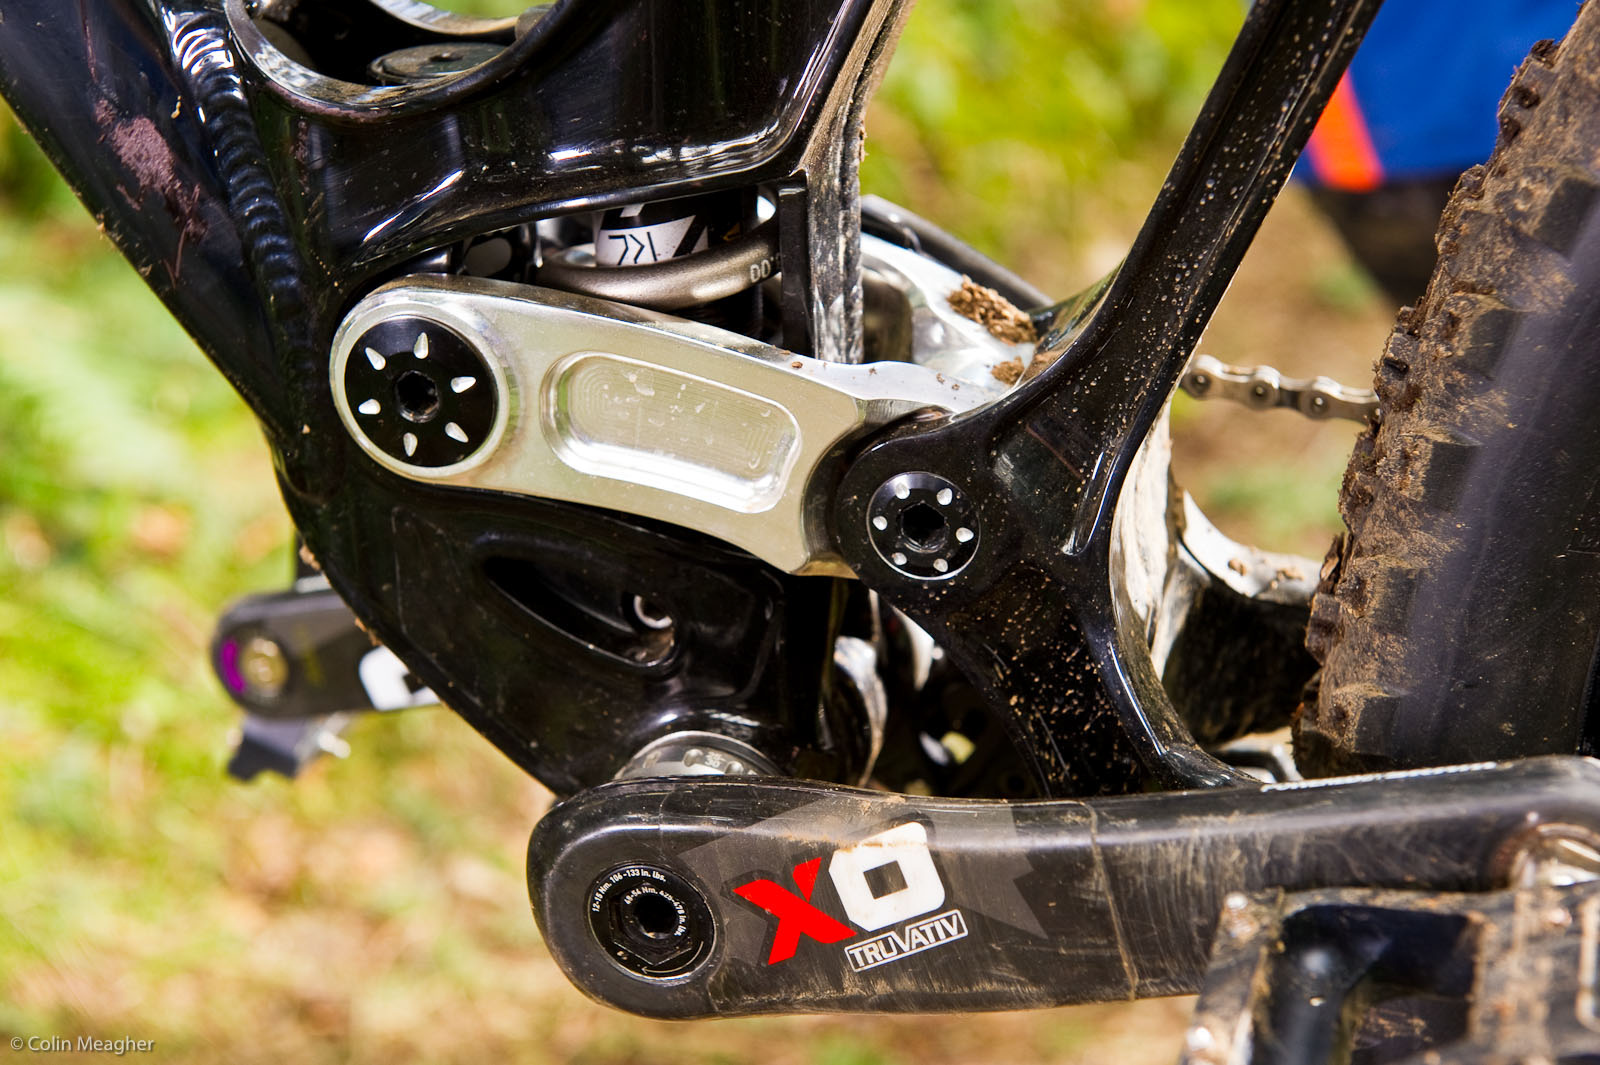 The rear shock mounts low in the frame for a lower center of gravity and better cornering. This, combined with the DW-link's anti-squat characteristics makes for a low, stiff bike that corners on a dime without the penalties normally associated with a low BB. The DW linkage shown here is mounted on 17mm pivot pins with a double row of  EnduroMax bearings for long life and a supple ride. Additionally, the short DW link and the 83mm wide bb shell contribute to minimize lateral flex.